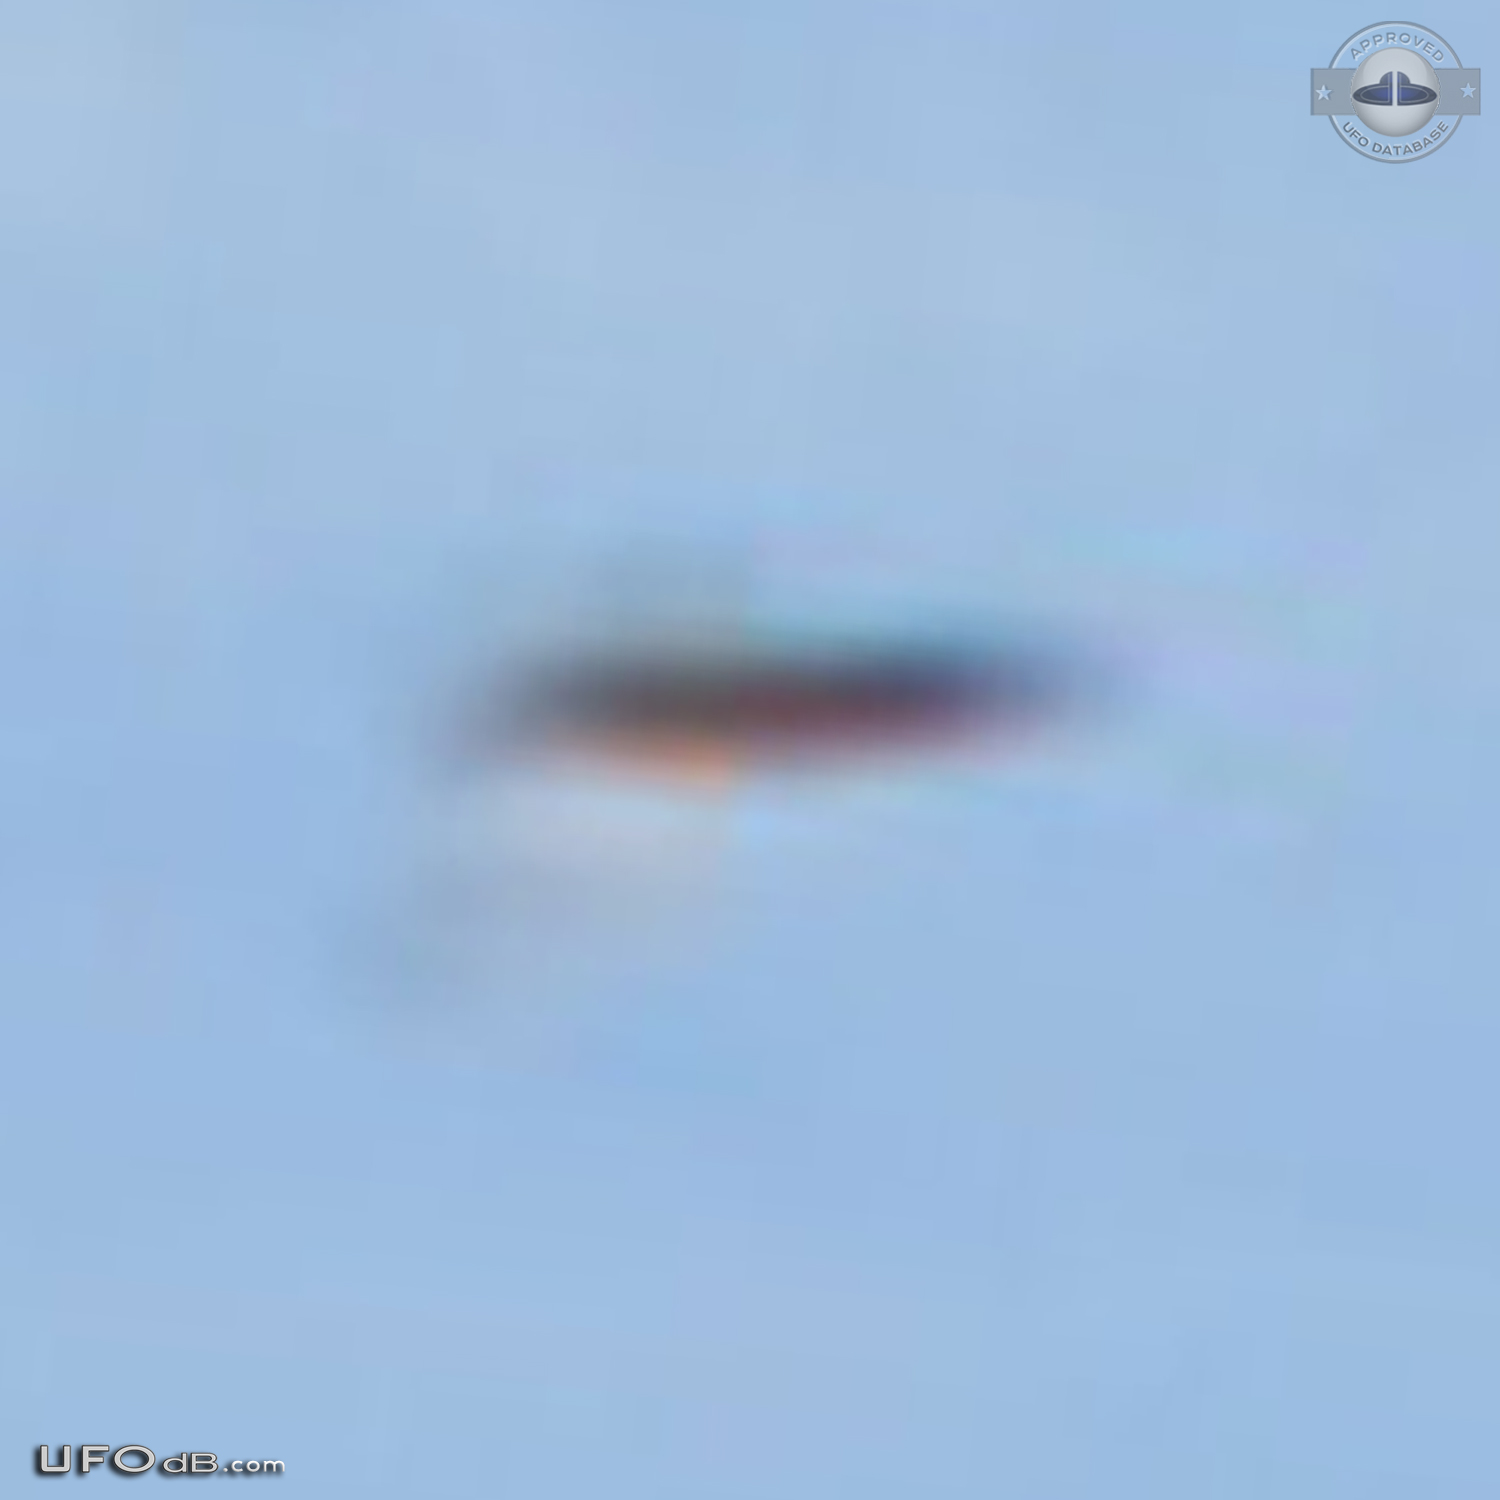 Photo captures passing UFO in Richmond, BC, Canada in August 2012 UFO Picture #474-4